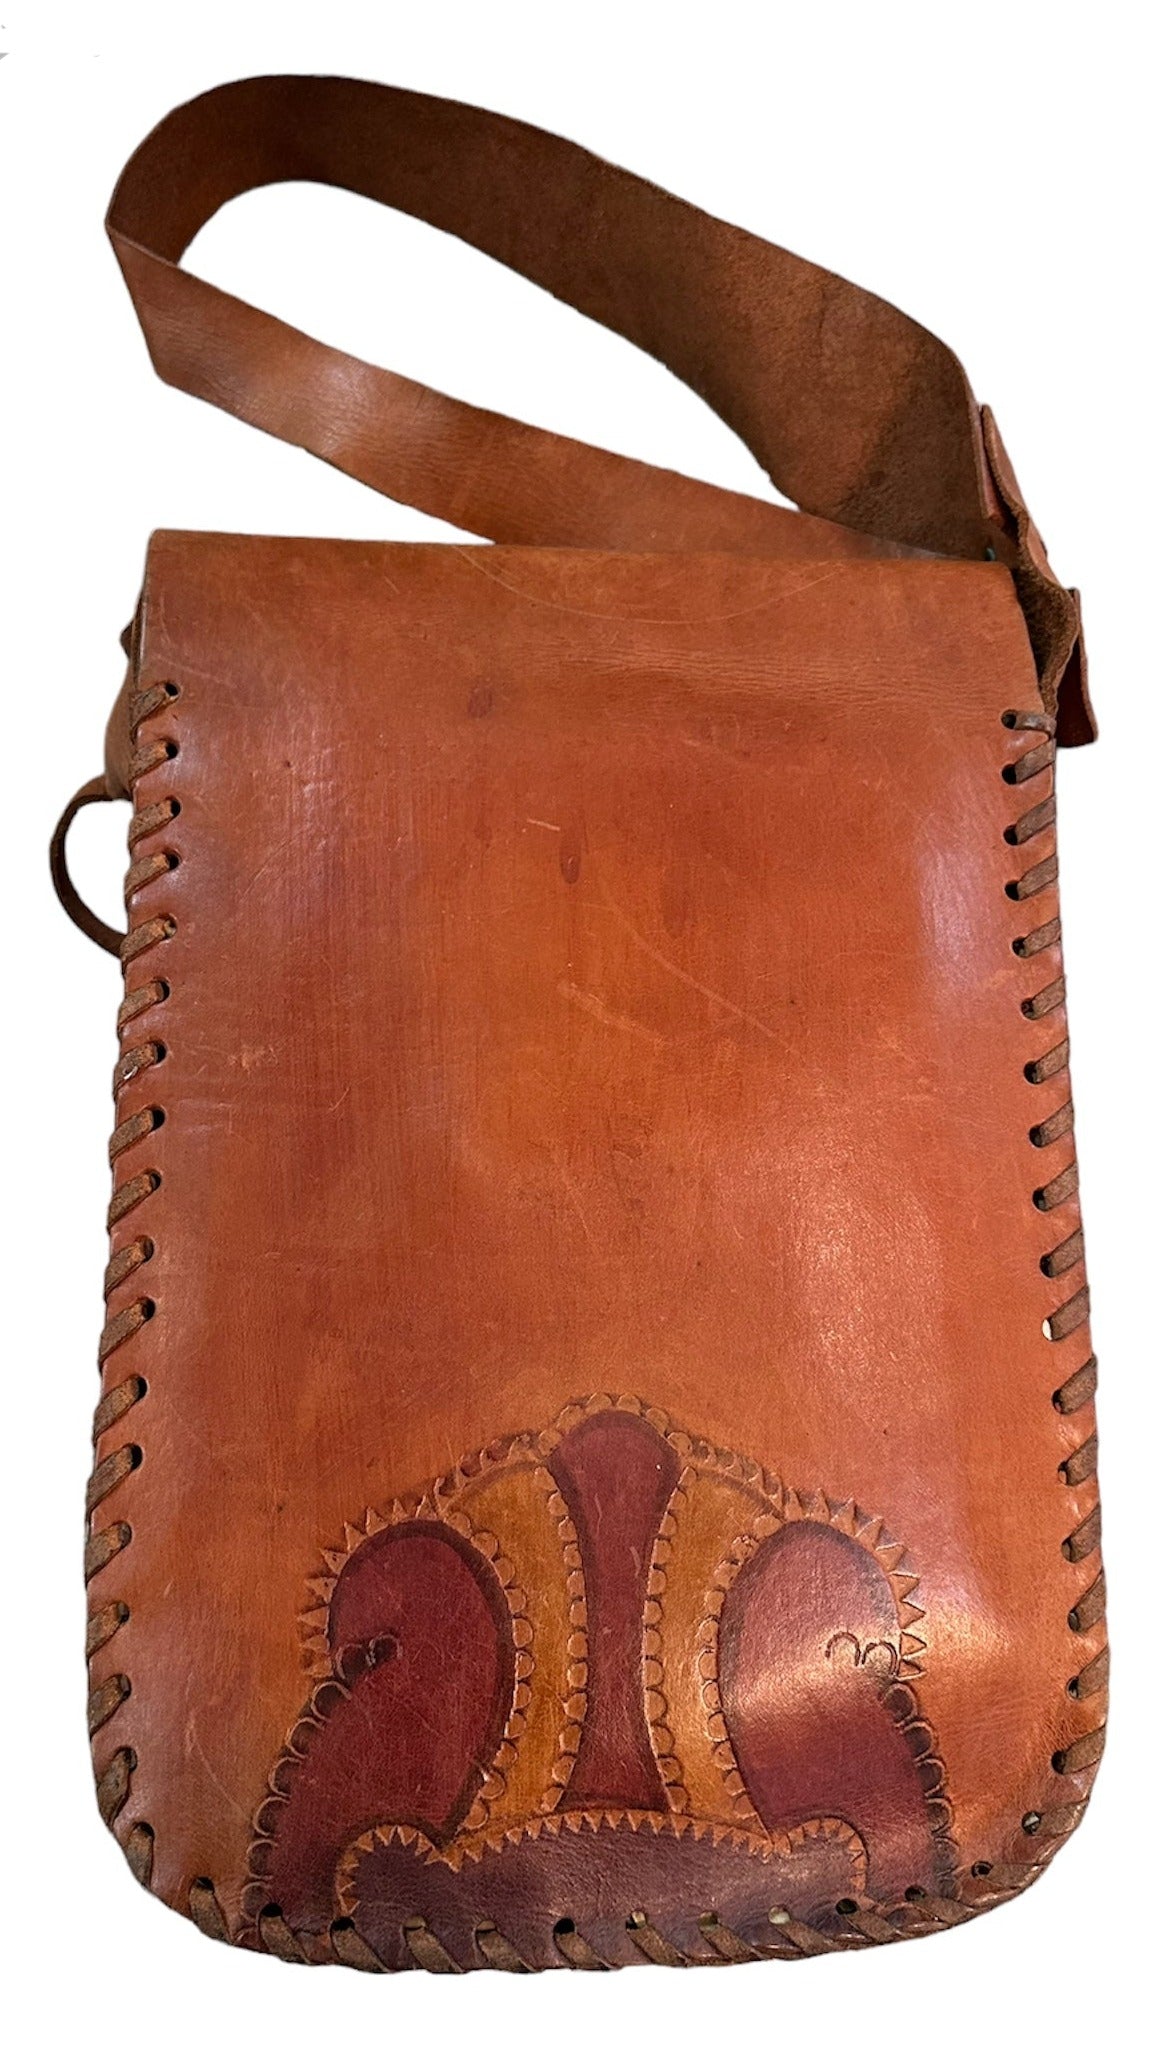  60s Hand Tooled Brown Leather Hippie Handbag with Whip StitchingBACK 3 of 7